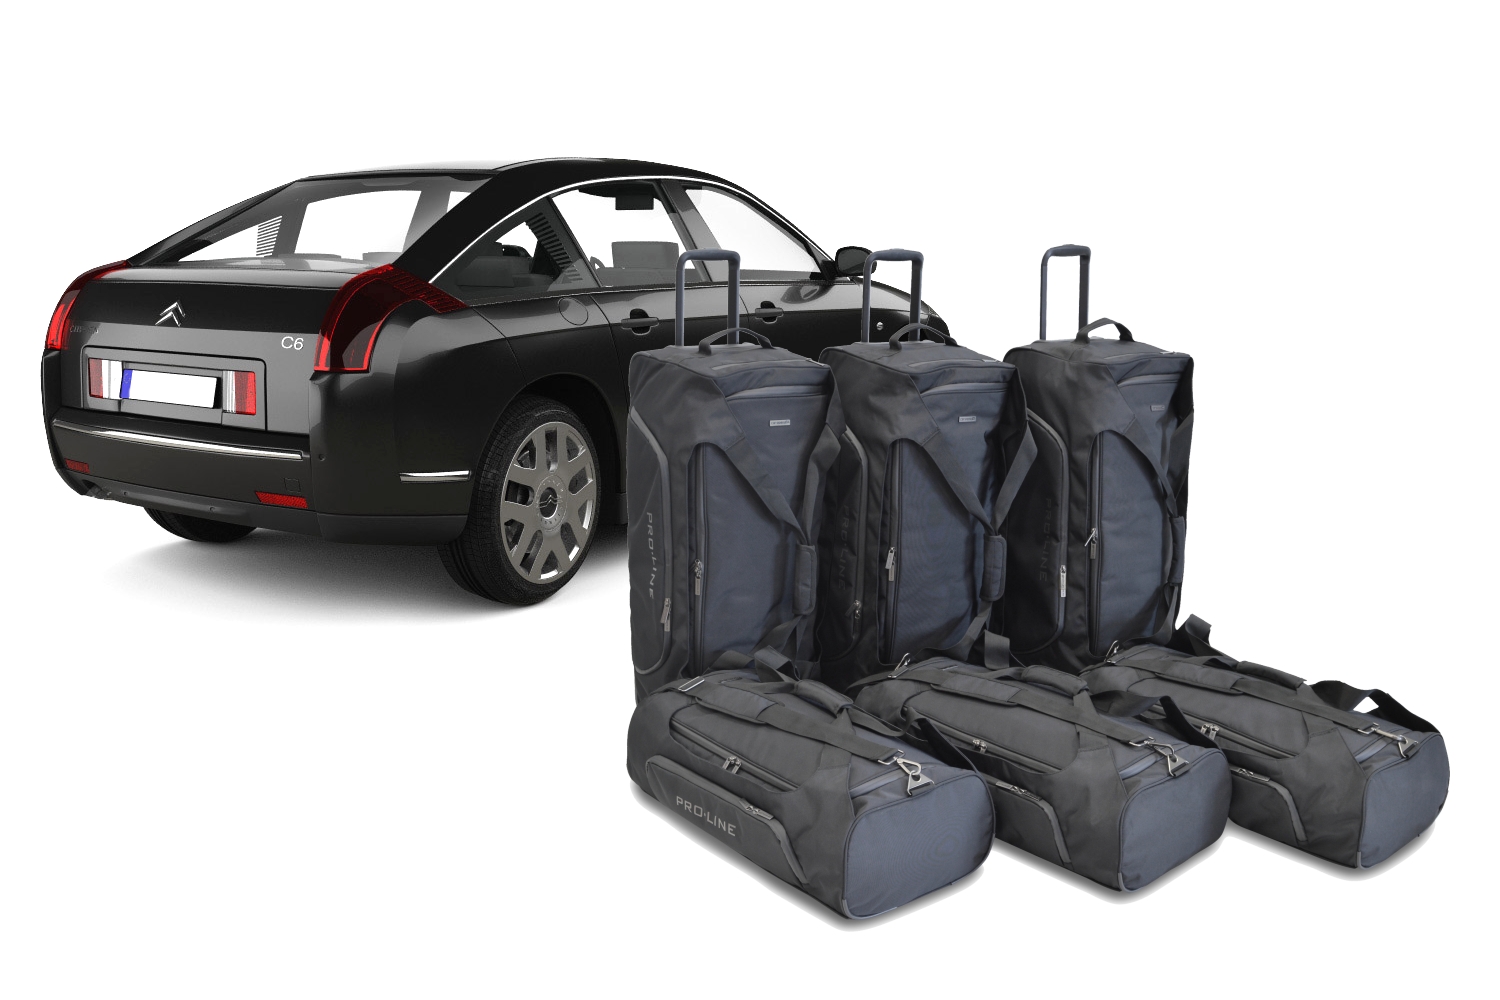 Travel bags fits Citroen C6 tailor made (6 bags) | Time and space saving  for € 379 | Perfect fit Car Bags | Shop for Covers car covers